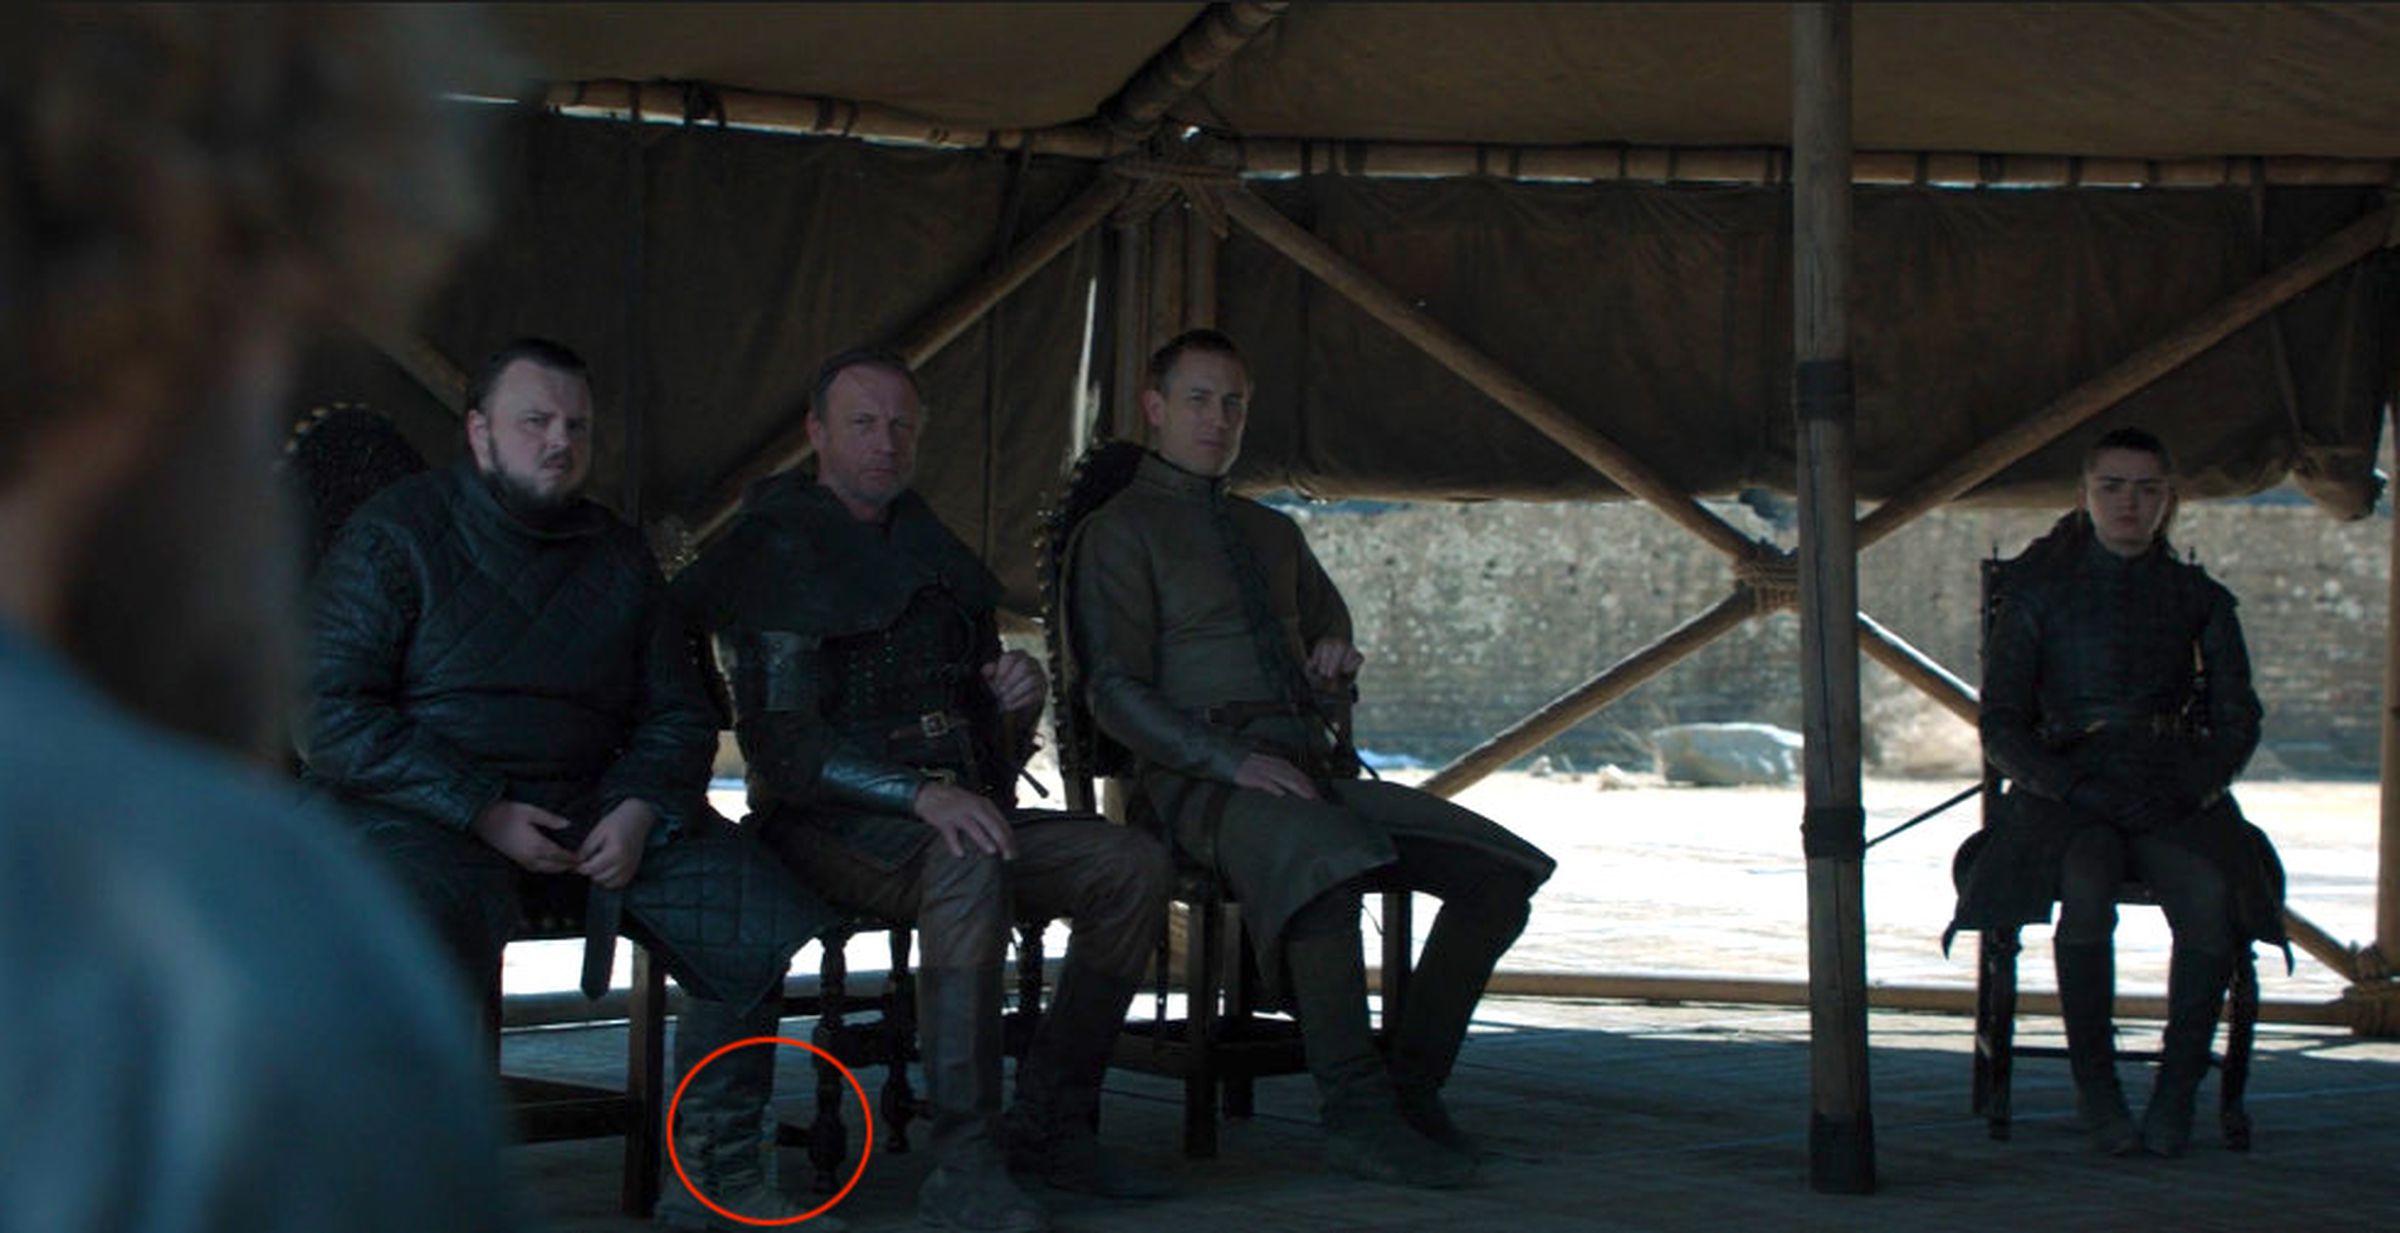 The water bottle is just behind Samwell Tarly’s foot above.